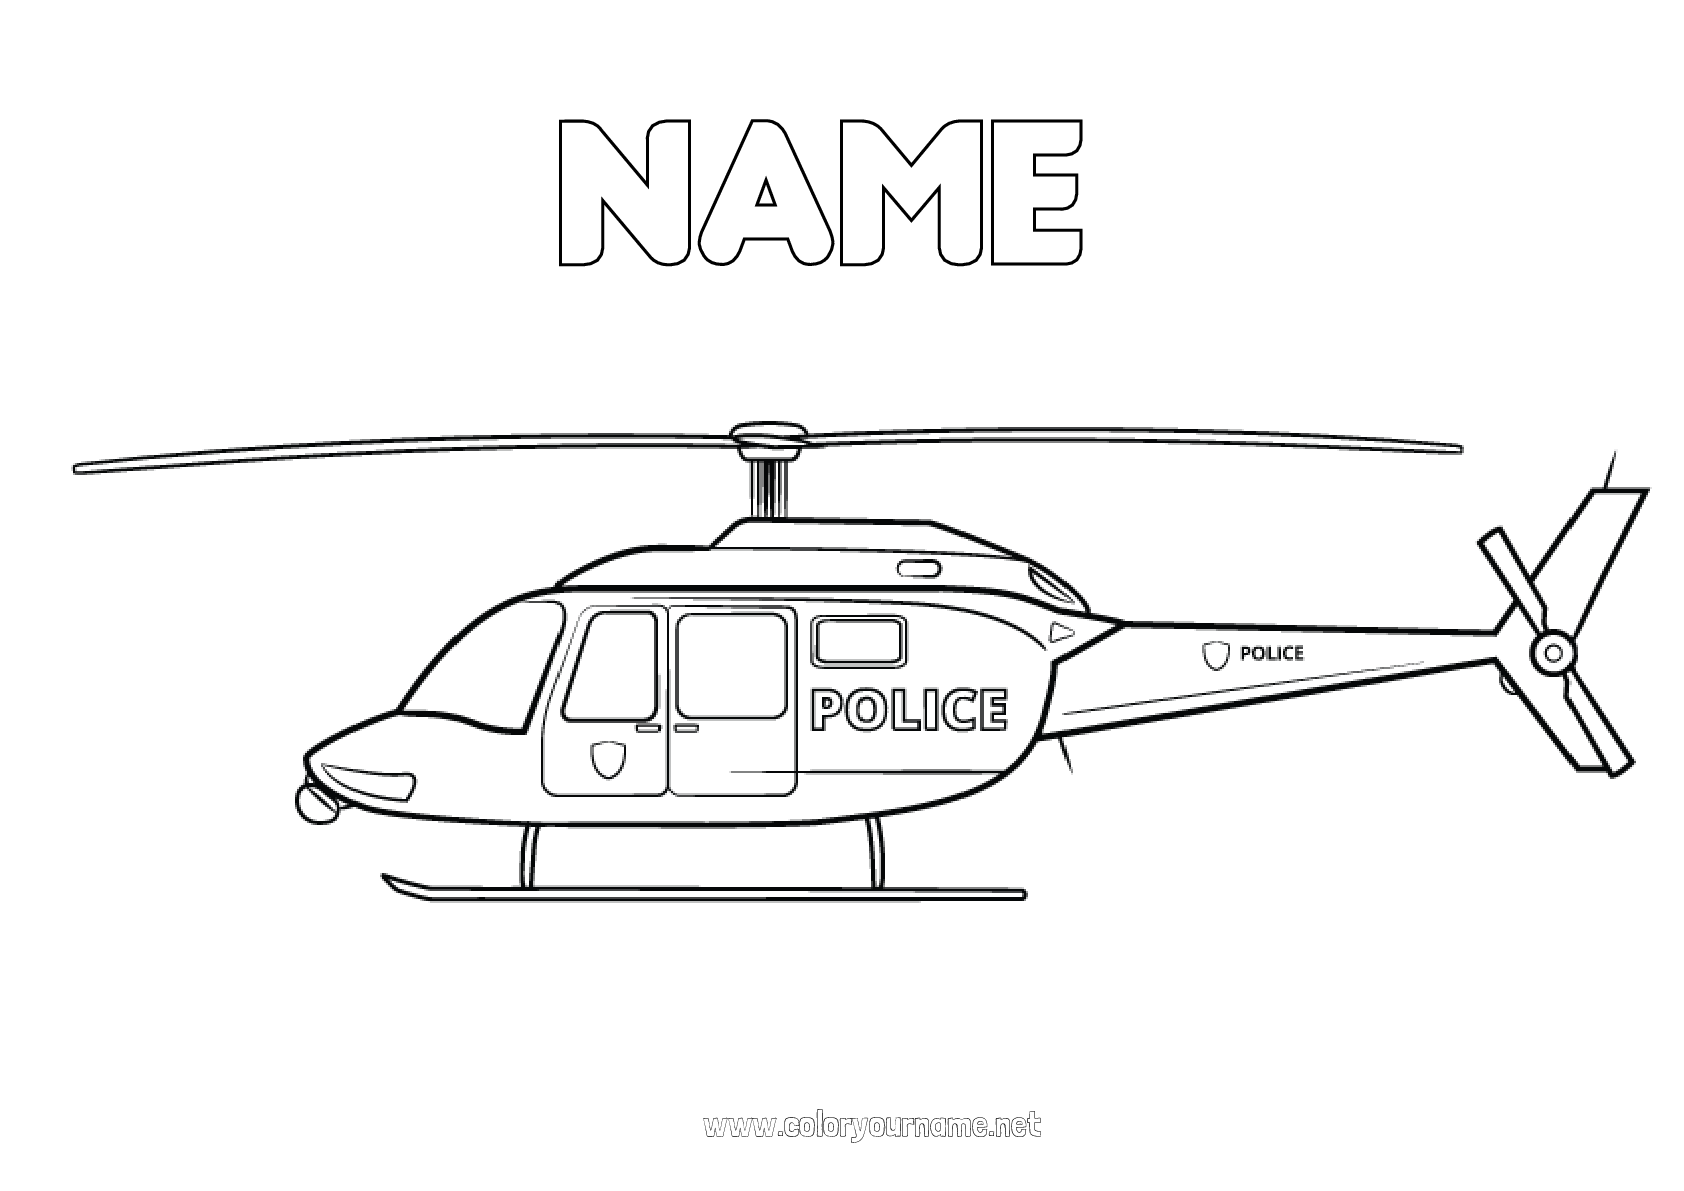 How to Draw a Helicopter